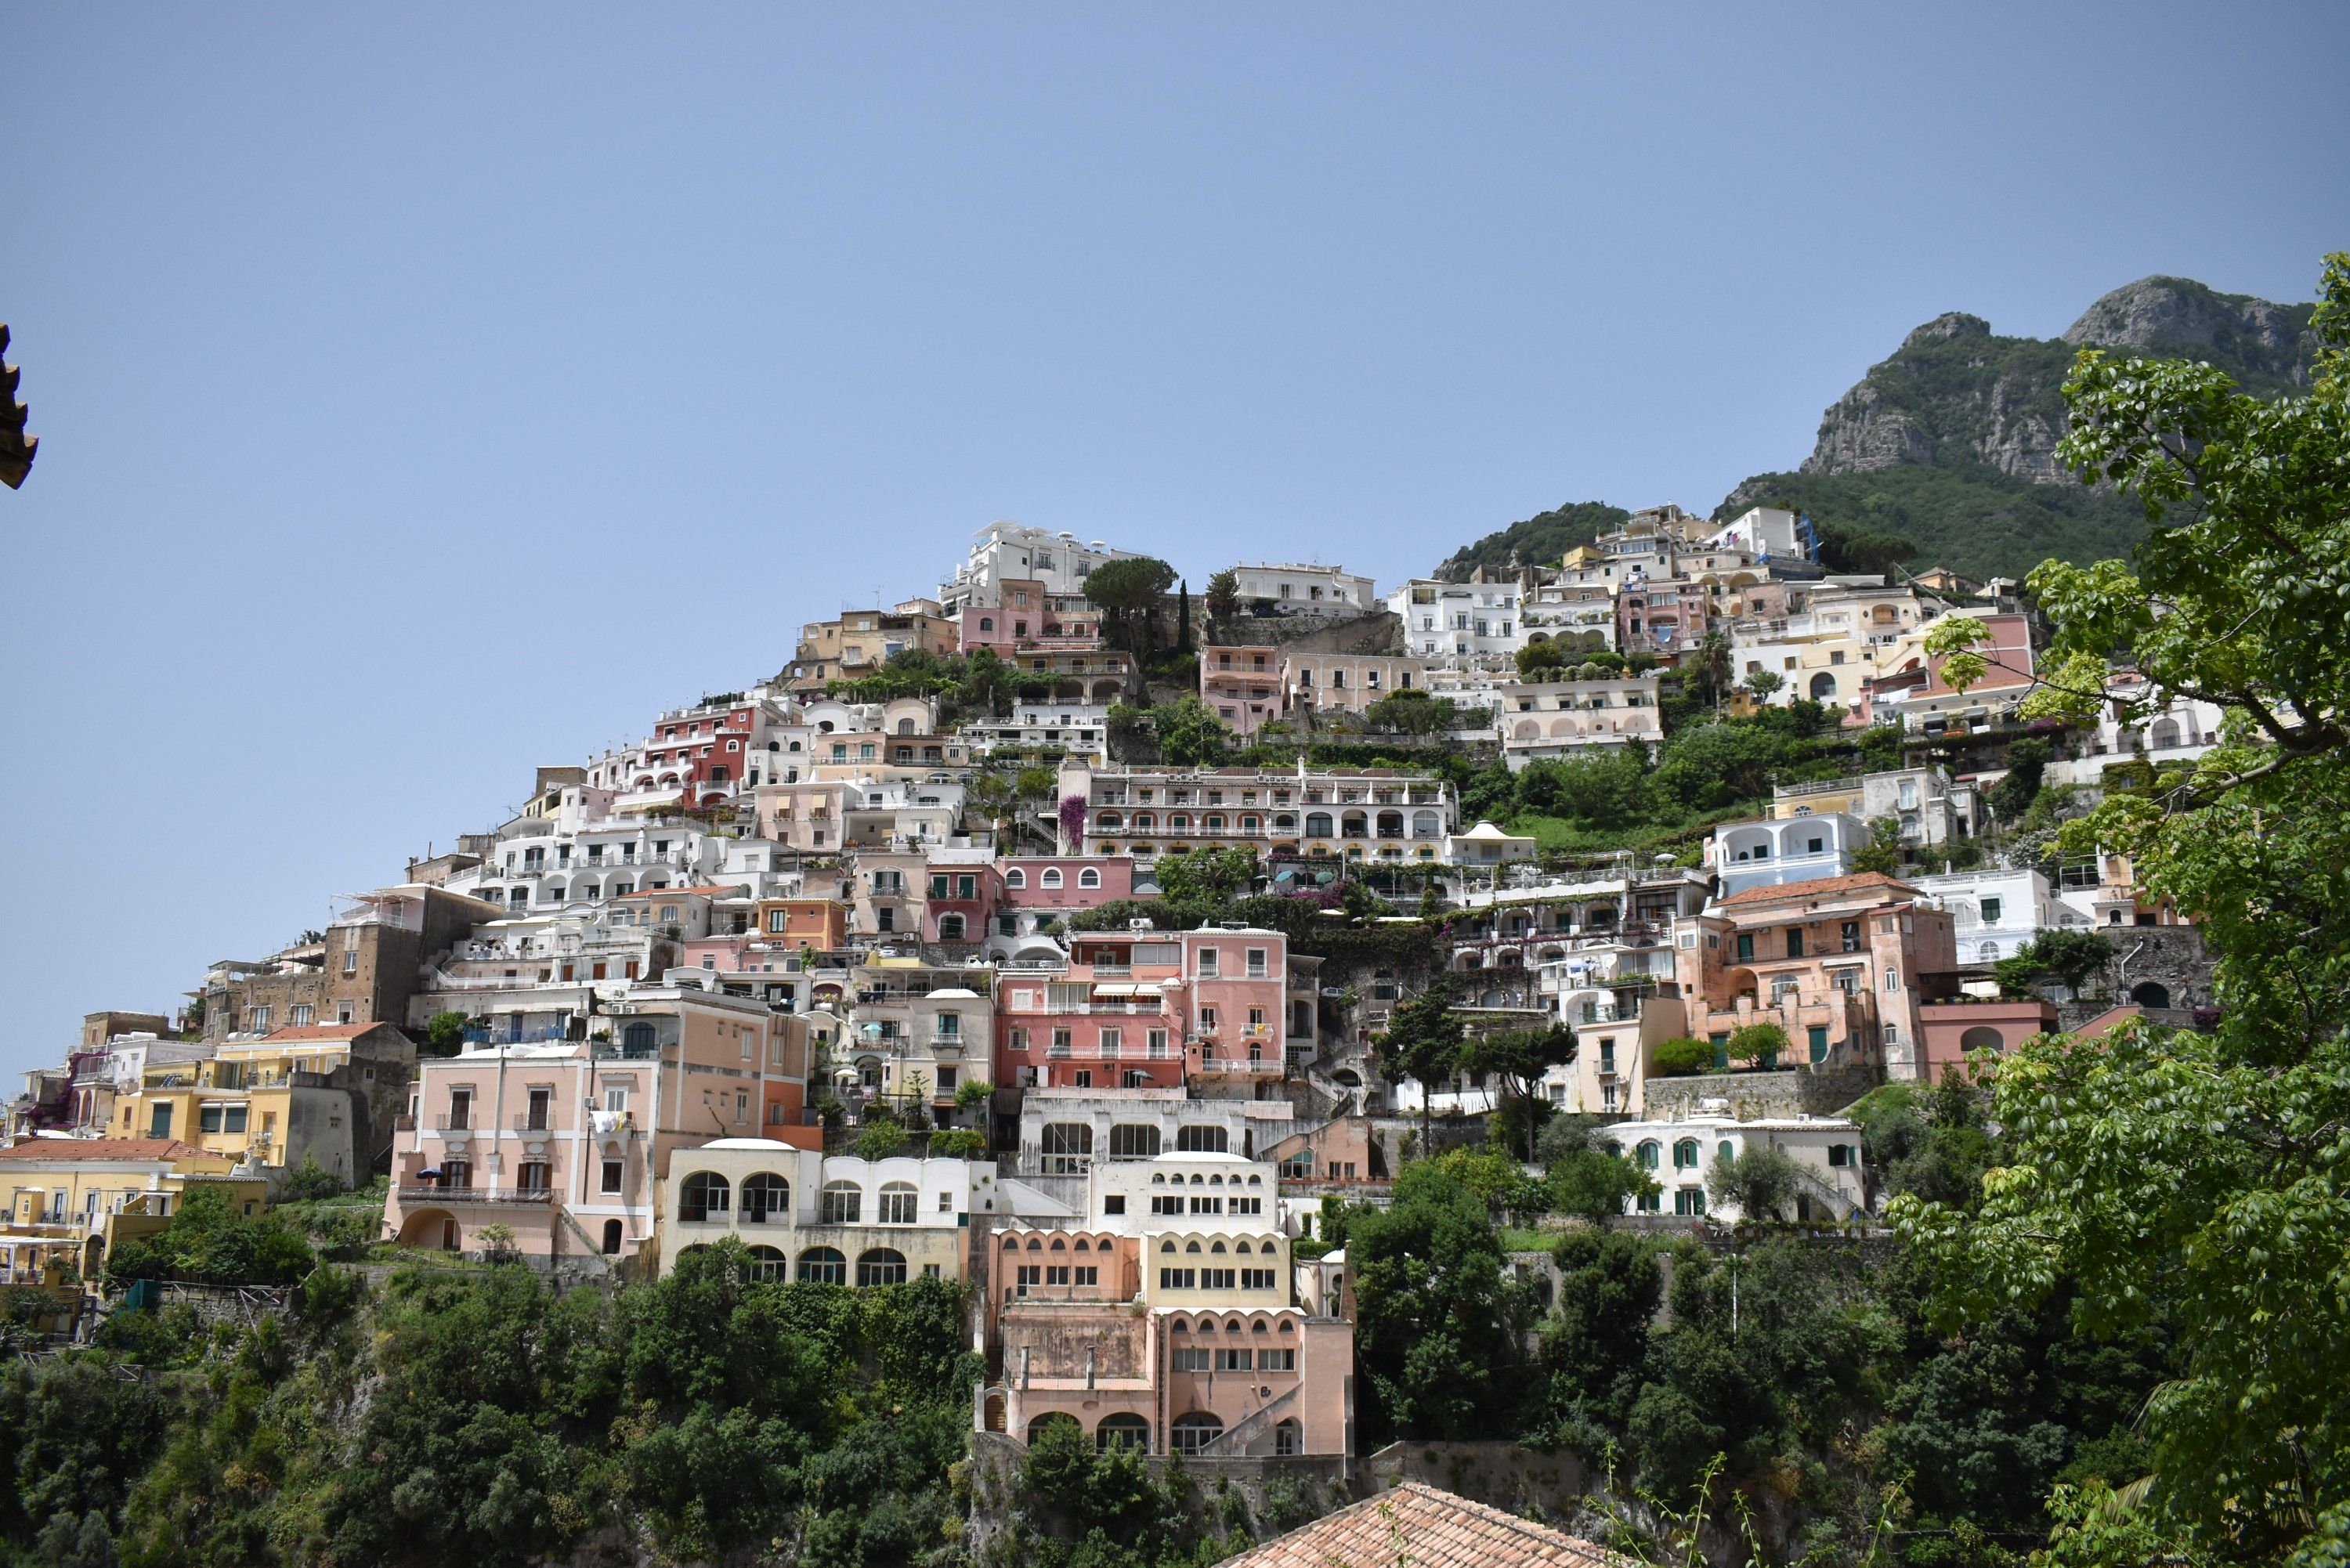 Caption: A photo of many colorful houses on a steep hillside, surrounded by lush green trees. (Local Guide @MoniDi)